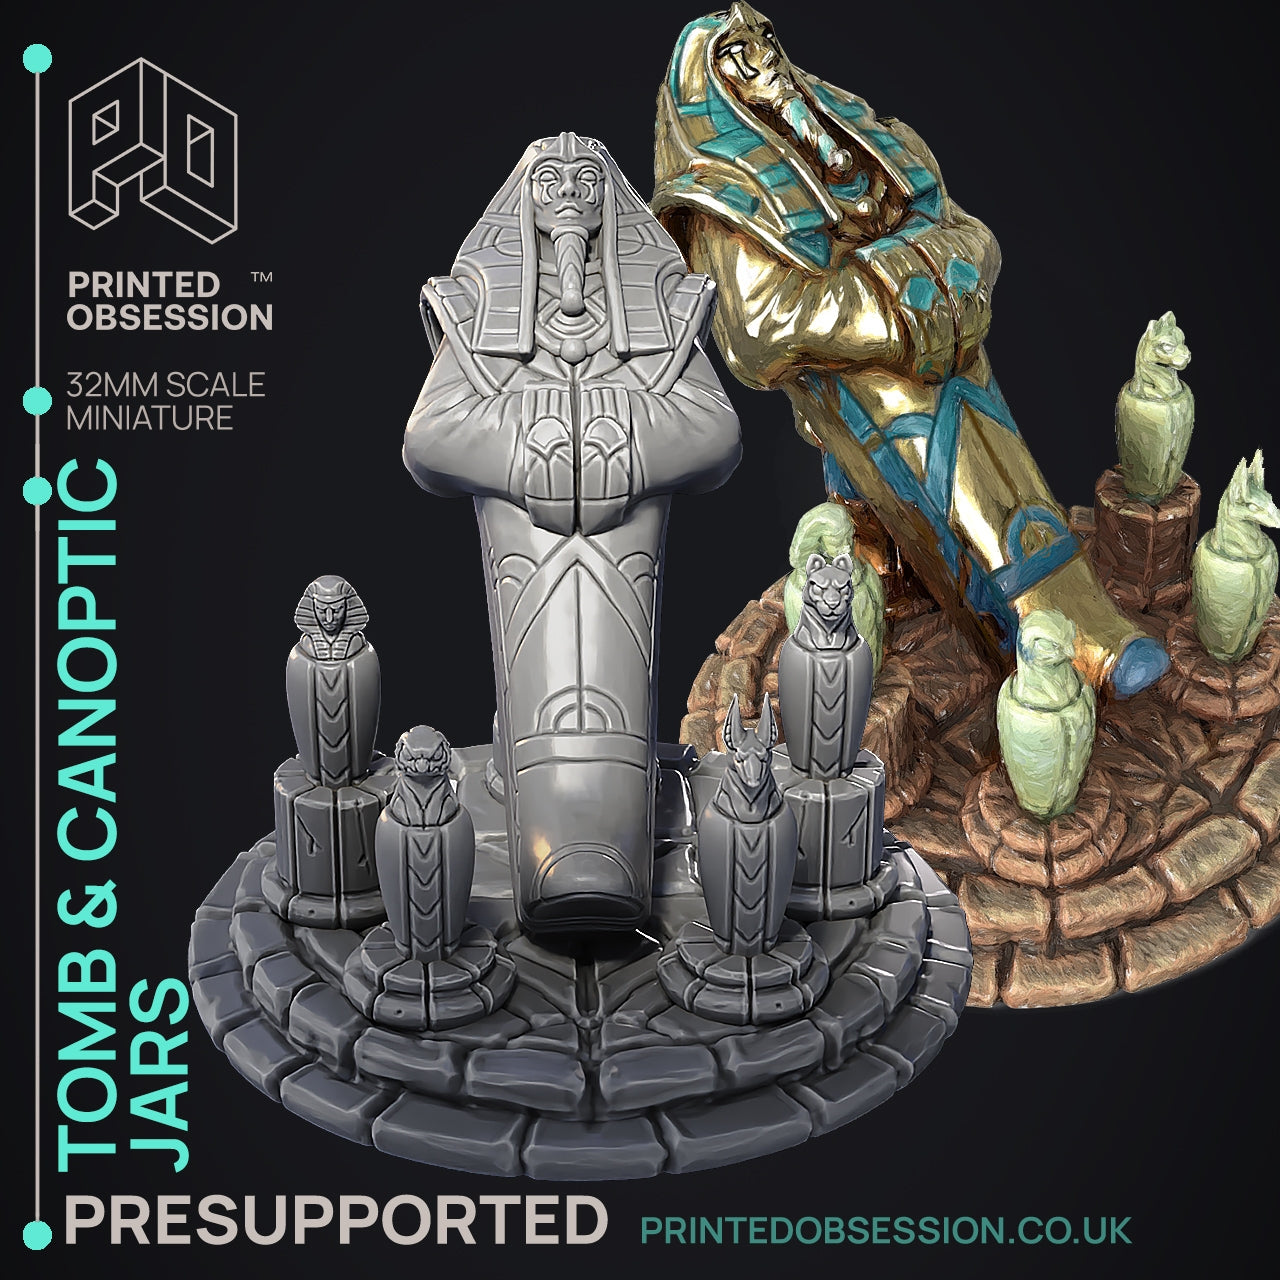 Terrain Parts Tombs, Gate, and jars - Court of Anubis - The Printed Obsession - Table-top mini, 3D Printed Collectable for painting and playing!